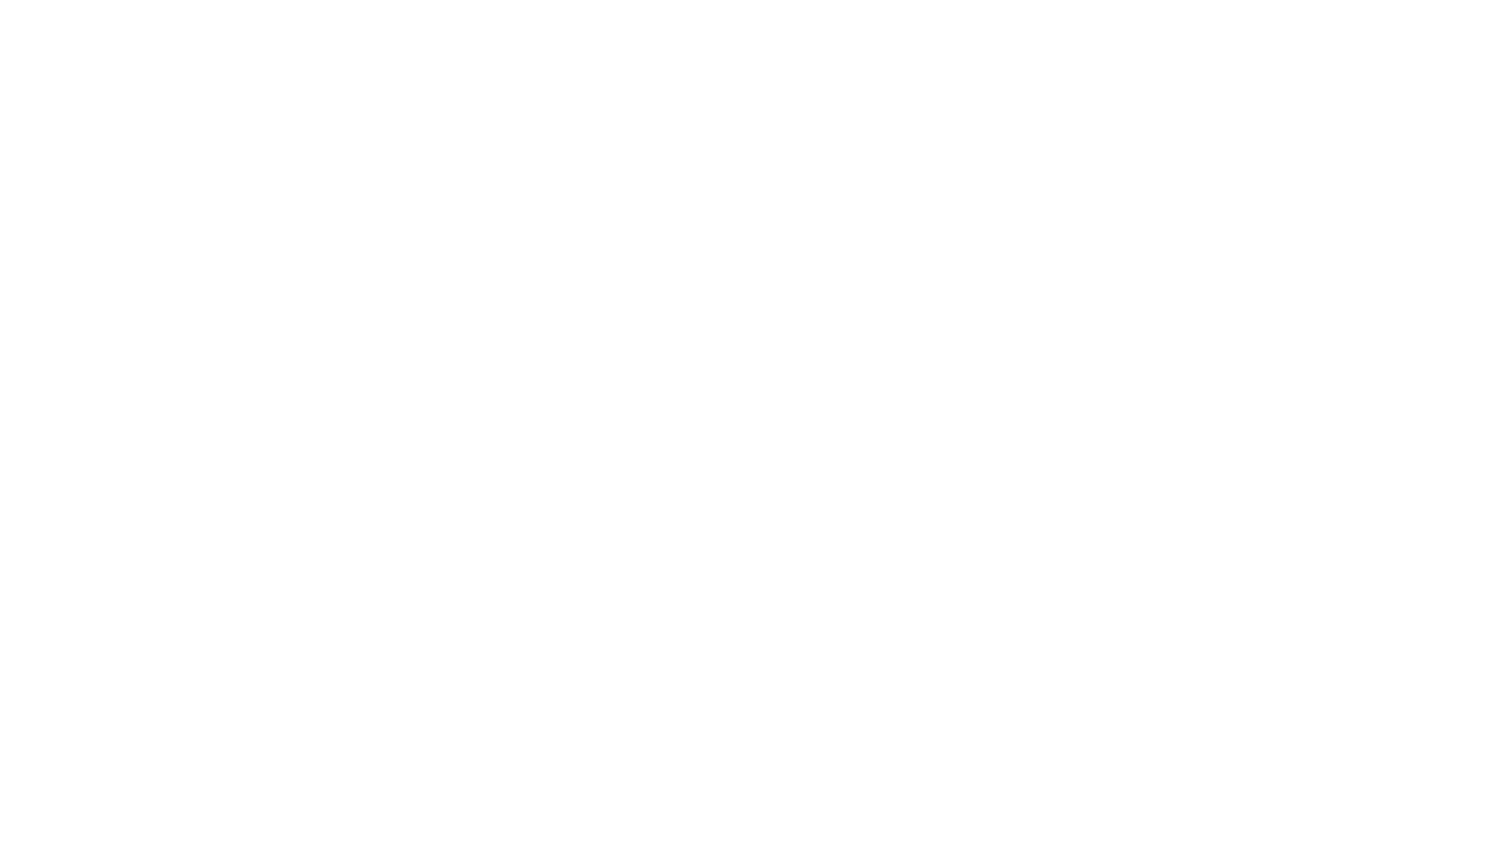 Southwest Indiana District Church of the Nazarene